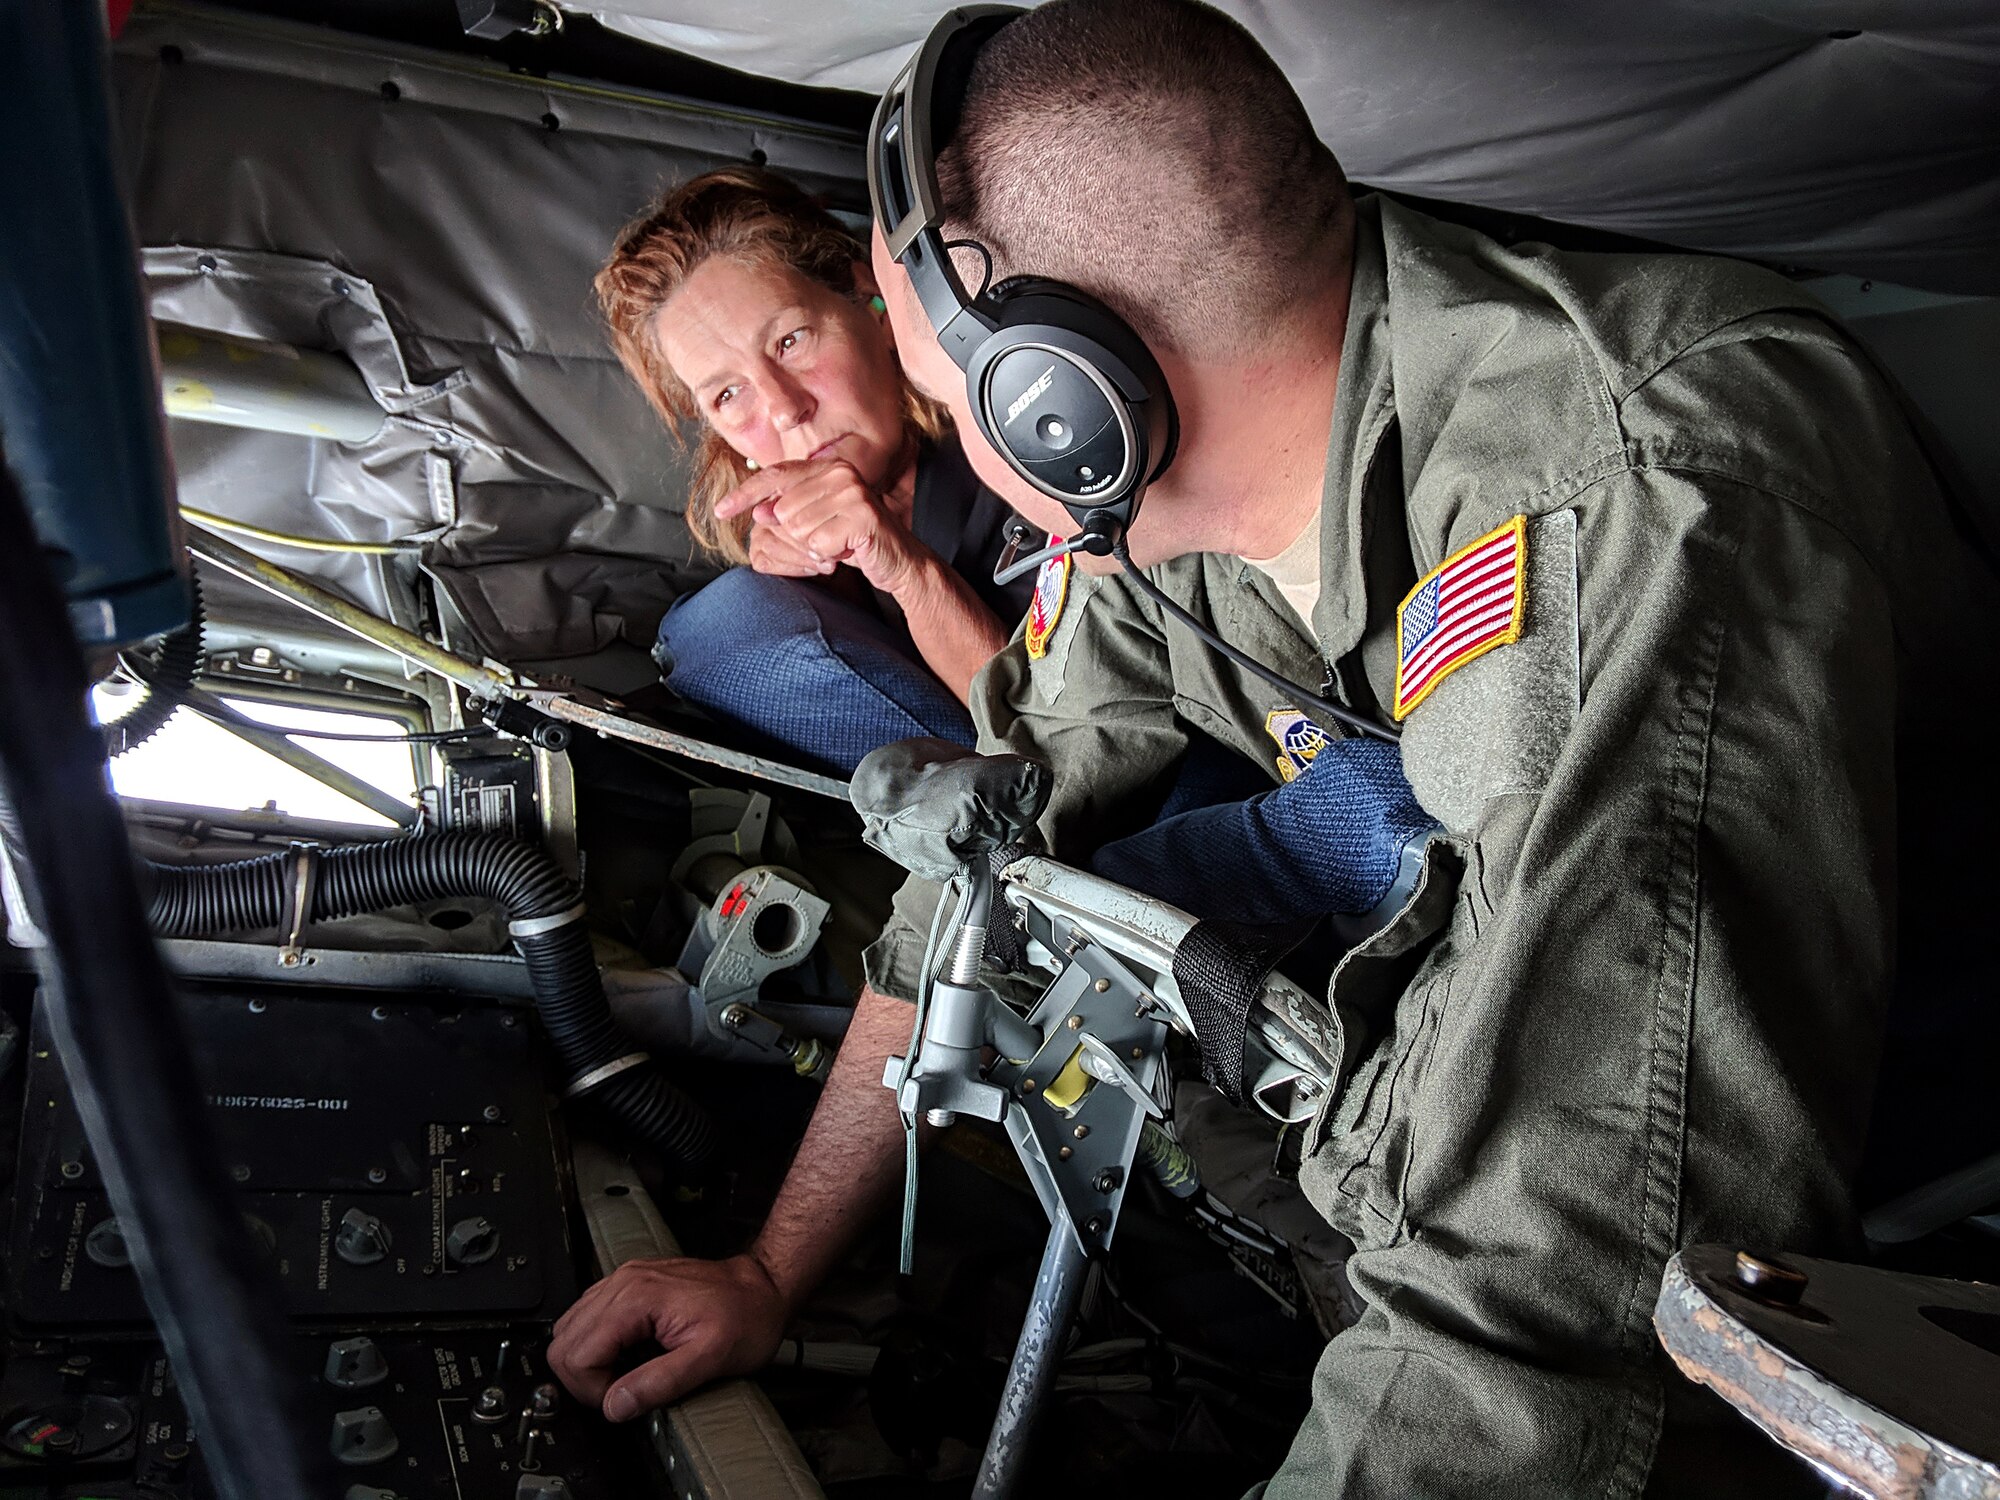 Kate Sharpe, an manager at Concord Hospital, asks questions about the KC-135 Stratotanker to Staff Sgt. Hector M. Acevedo II, a 64th Air Refueling Squadron boom operator, on Aug. 14, 2018. Sharpe traveled to Michigan as part of an Employer Support of the Guard and Reserve tour to Camp Grayling to visit her employee, Maj. Richaqrd LaFlame, a physician's assistant, who also serves as the 197th Field Artillery Brigade surgeon, while he particpated in his unit's annual training event. (Photo by Staff Sgt. Kayla White, 157th Air Refueling Wing Public Affairs)